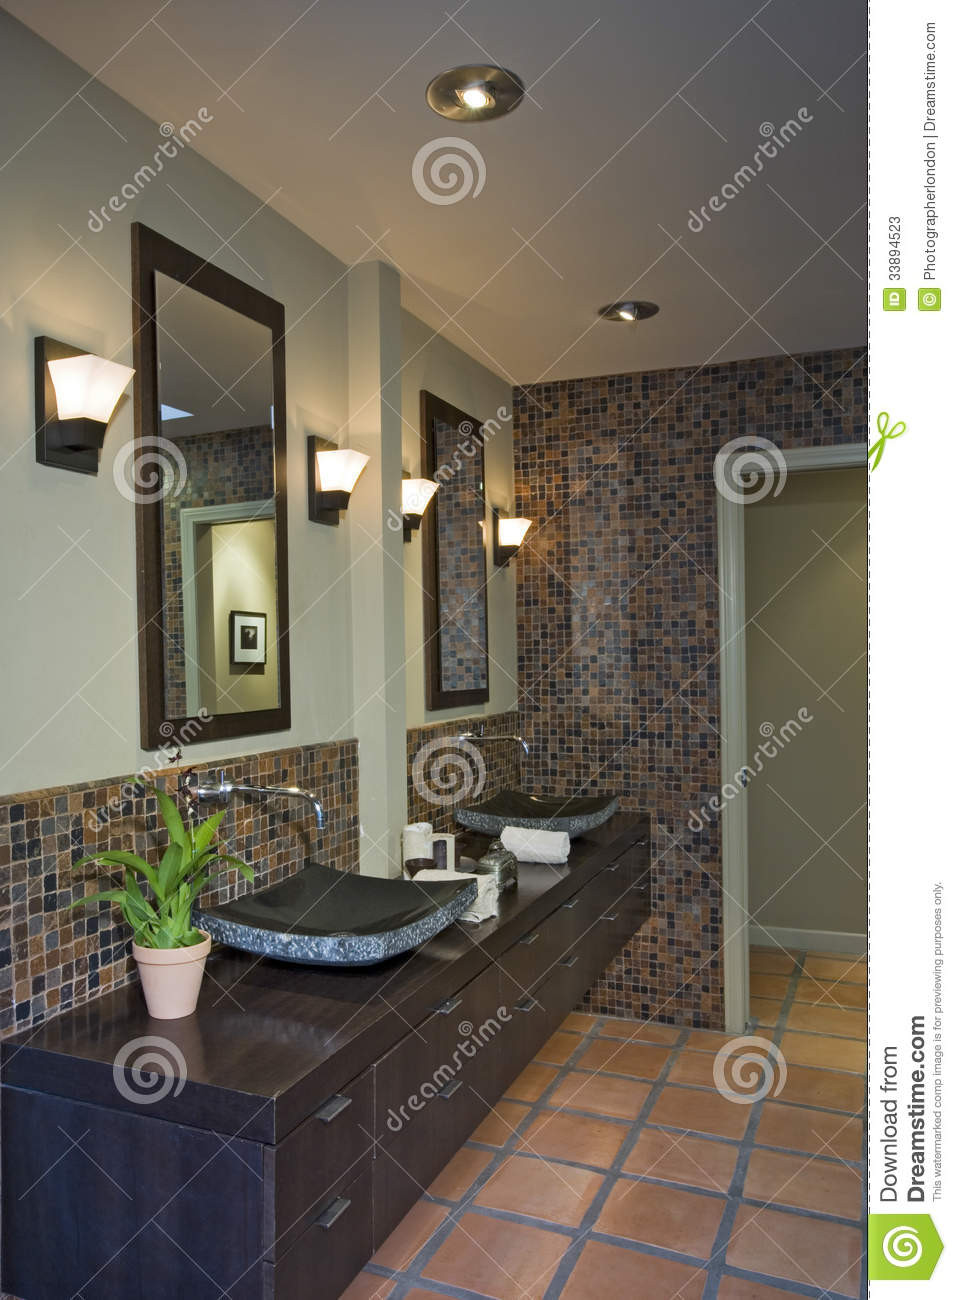 Mirrors Over Bathroom Sinks
 Lamps By Mirrors Over Sinks In Bathroom Stock Image